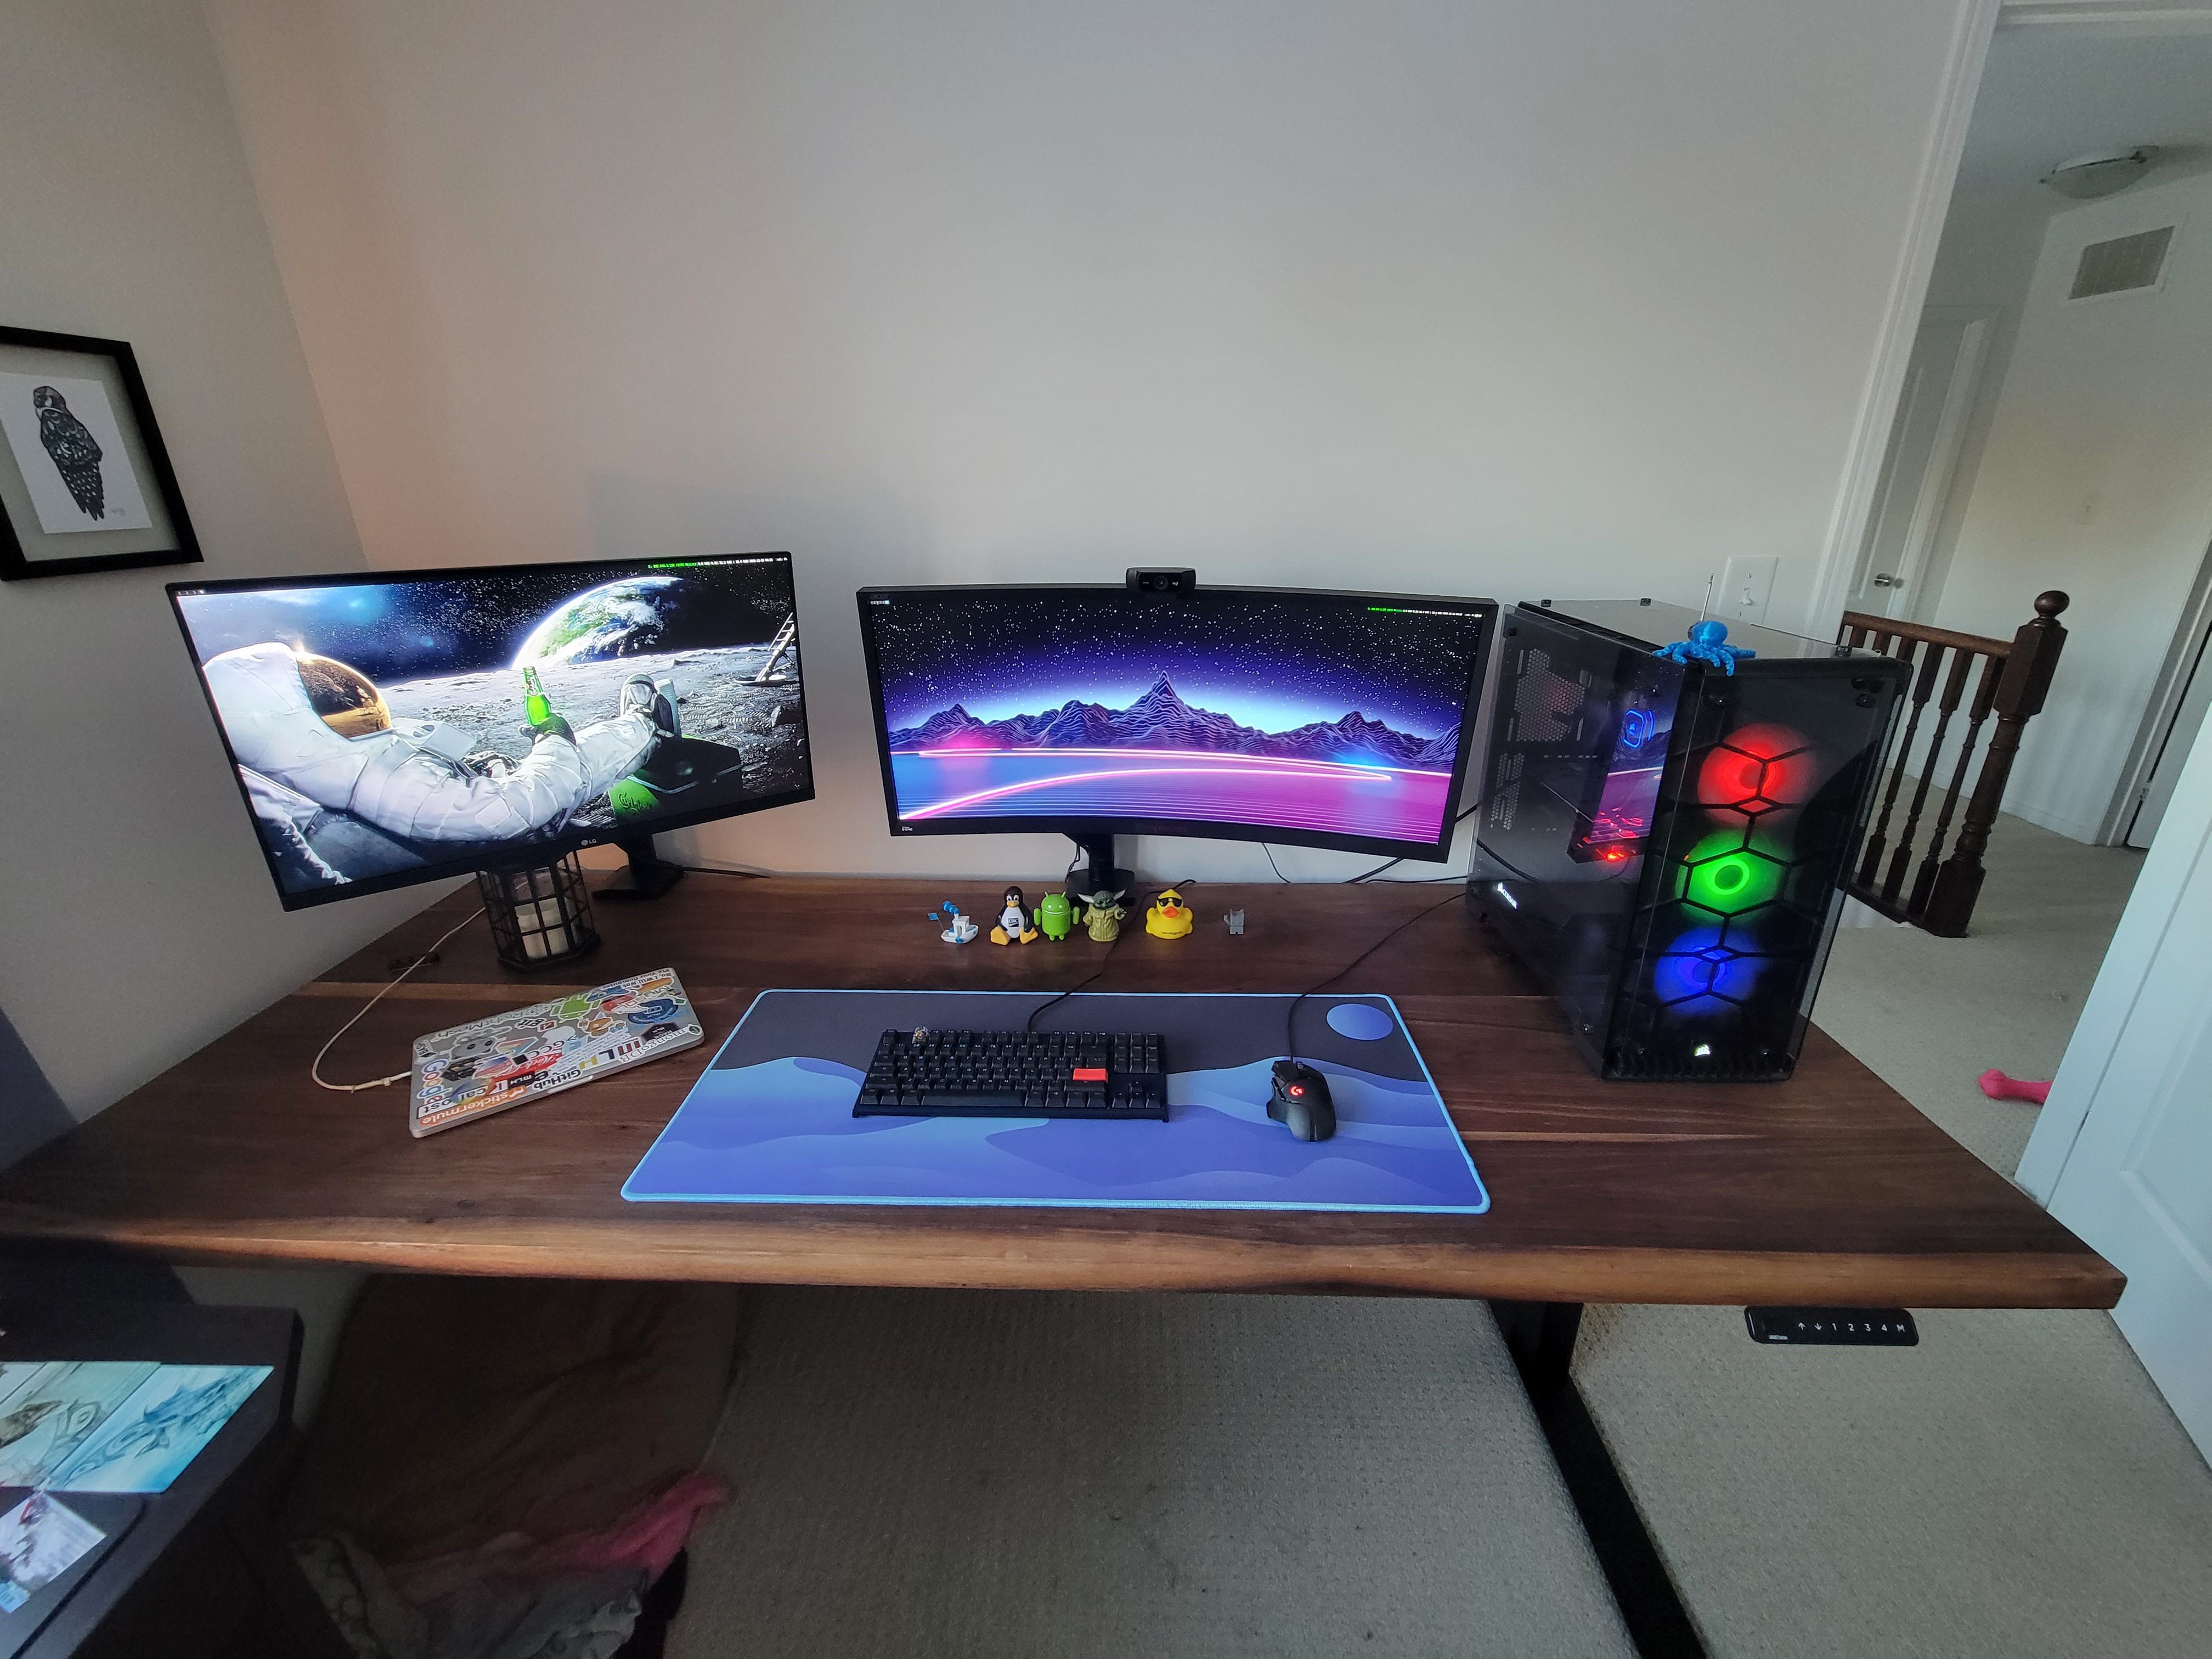 Final completed version of the desk